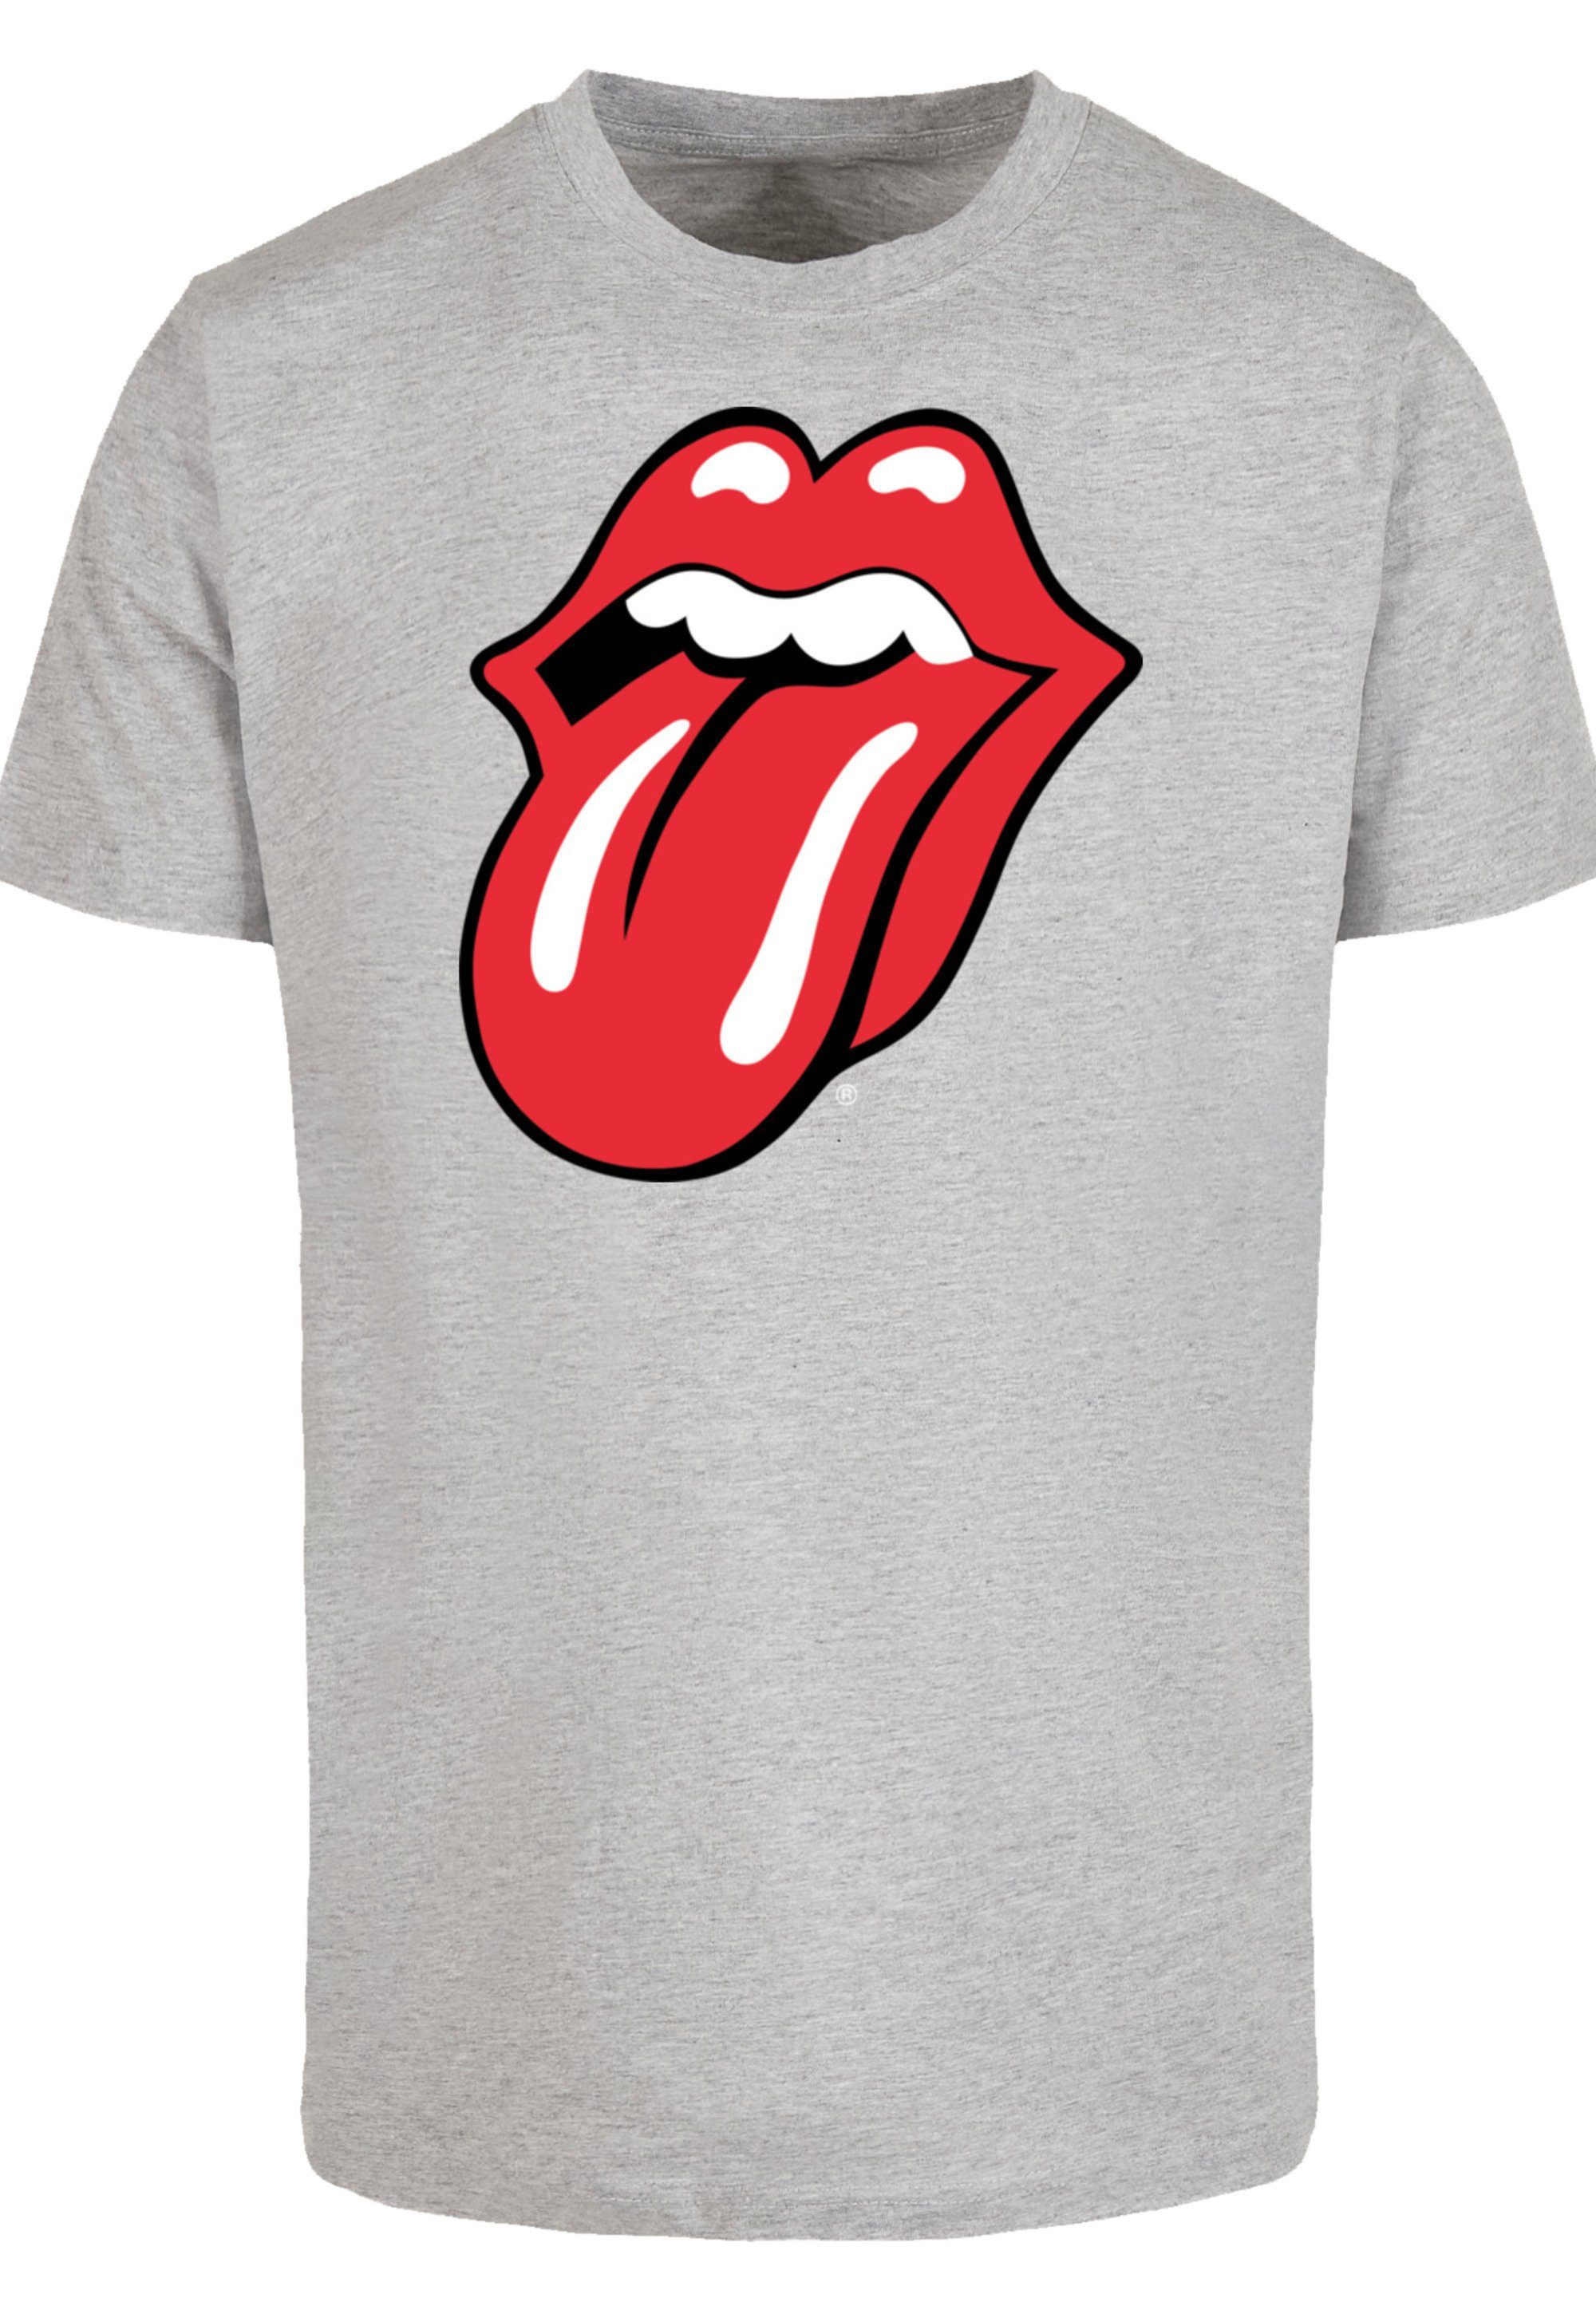 F4NT4STIC T-Shirt The heather Rote grey Zunge Rolling Print Stones